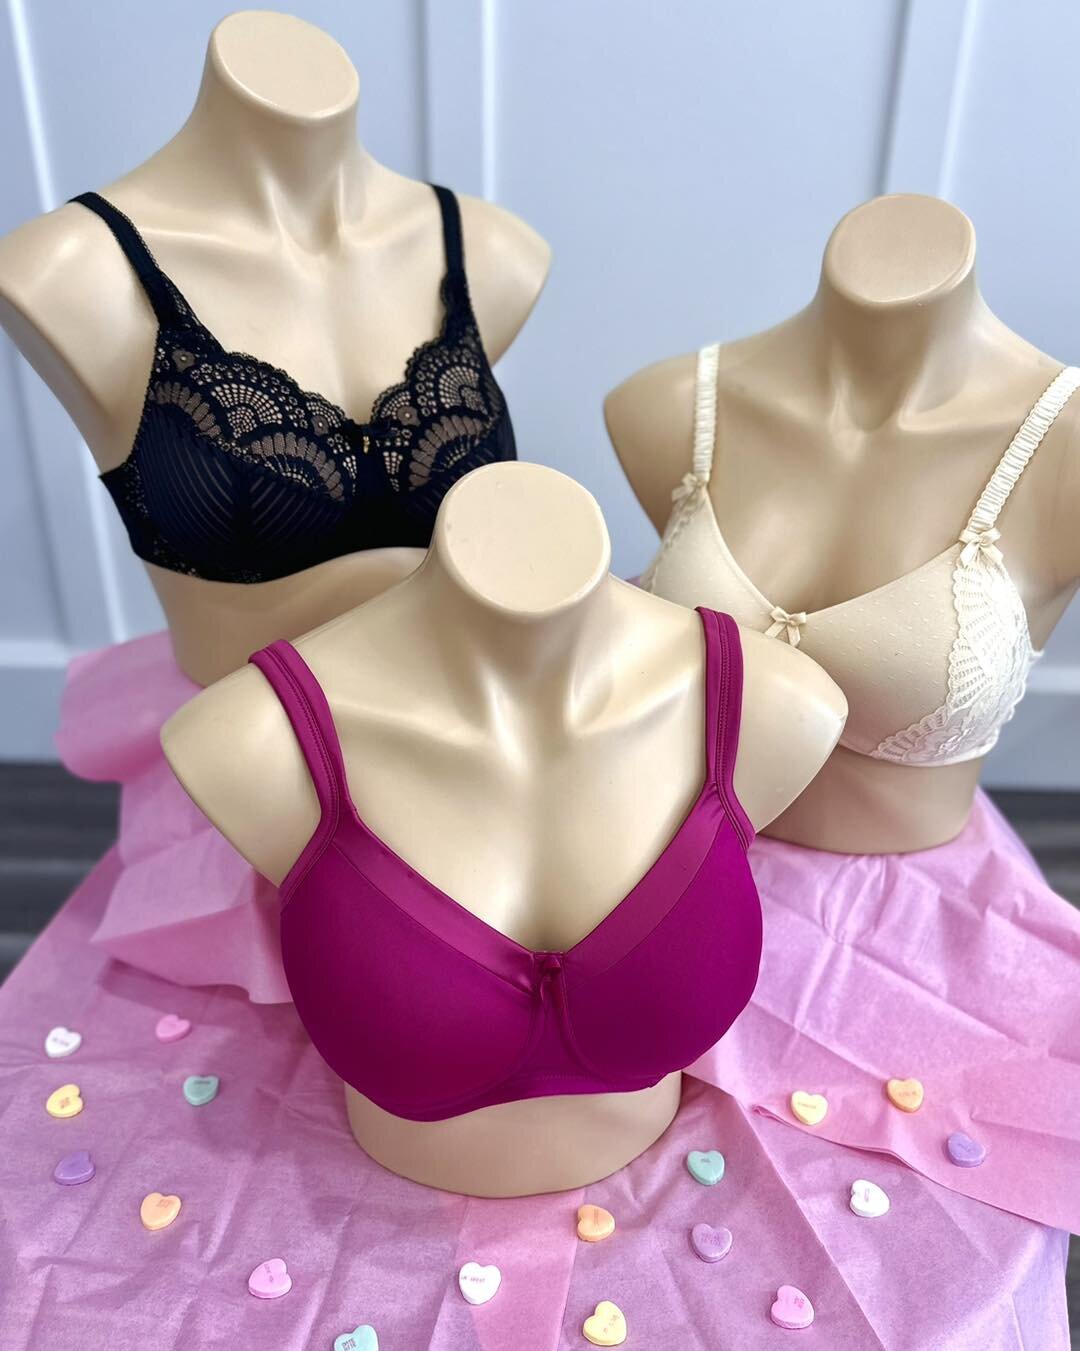 All the love for our favorite gals this Galentines&rsquo; Day! What better way to celebrate than coming to get some cute new bras!

#mastectomybra #mastectomyfashion #mastectomy #breastcancersupport #empoweringwomen #womenownedbusiness #breastprosthe